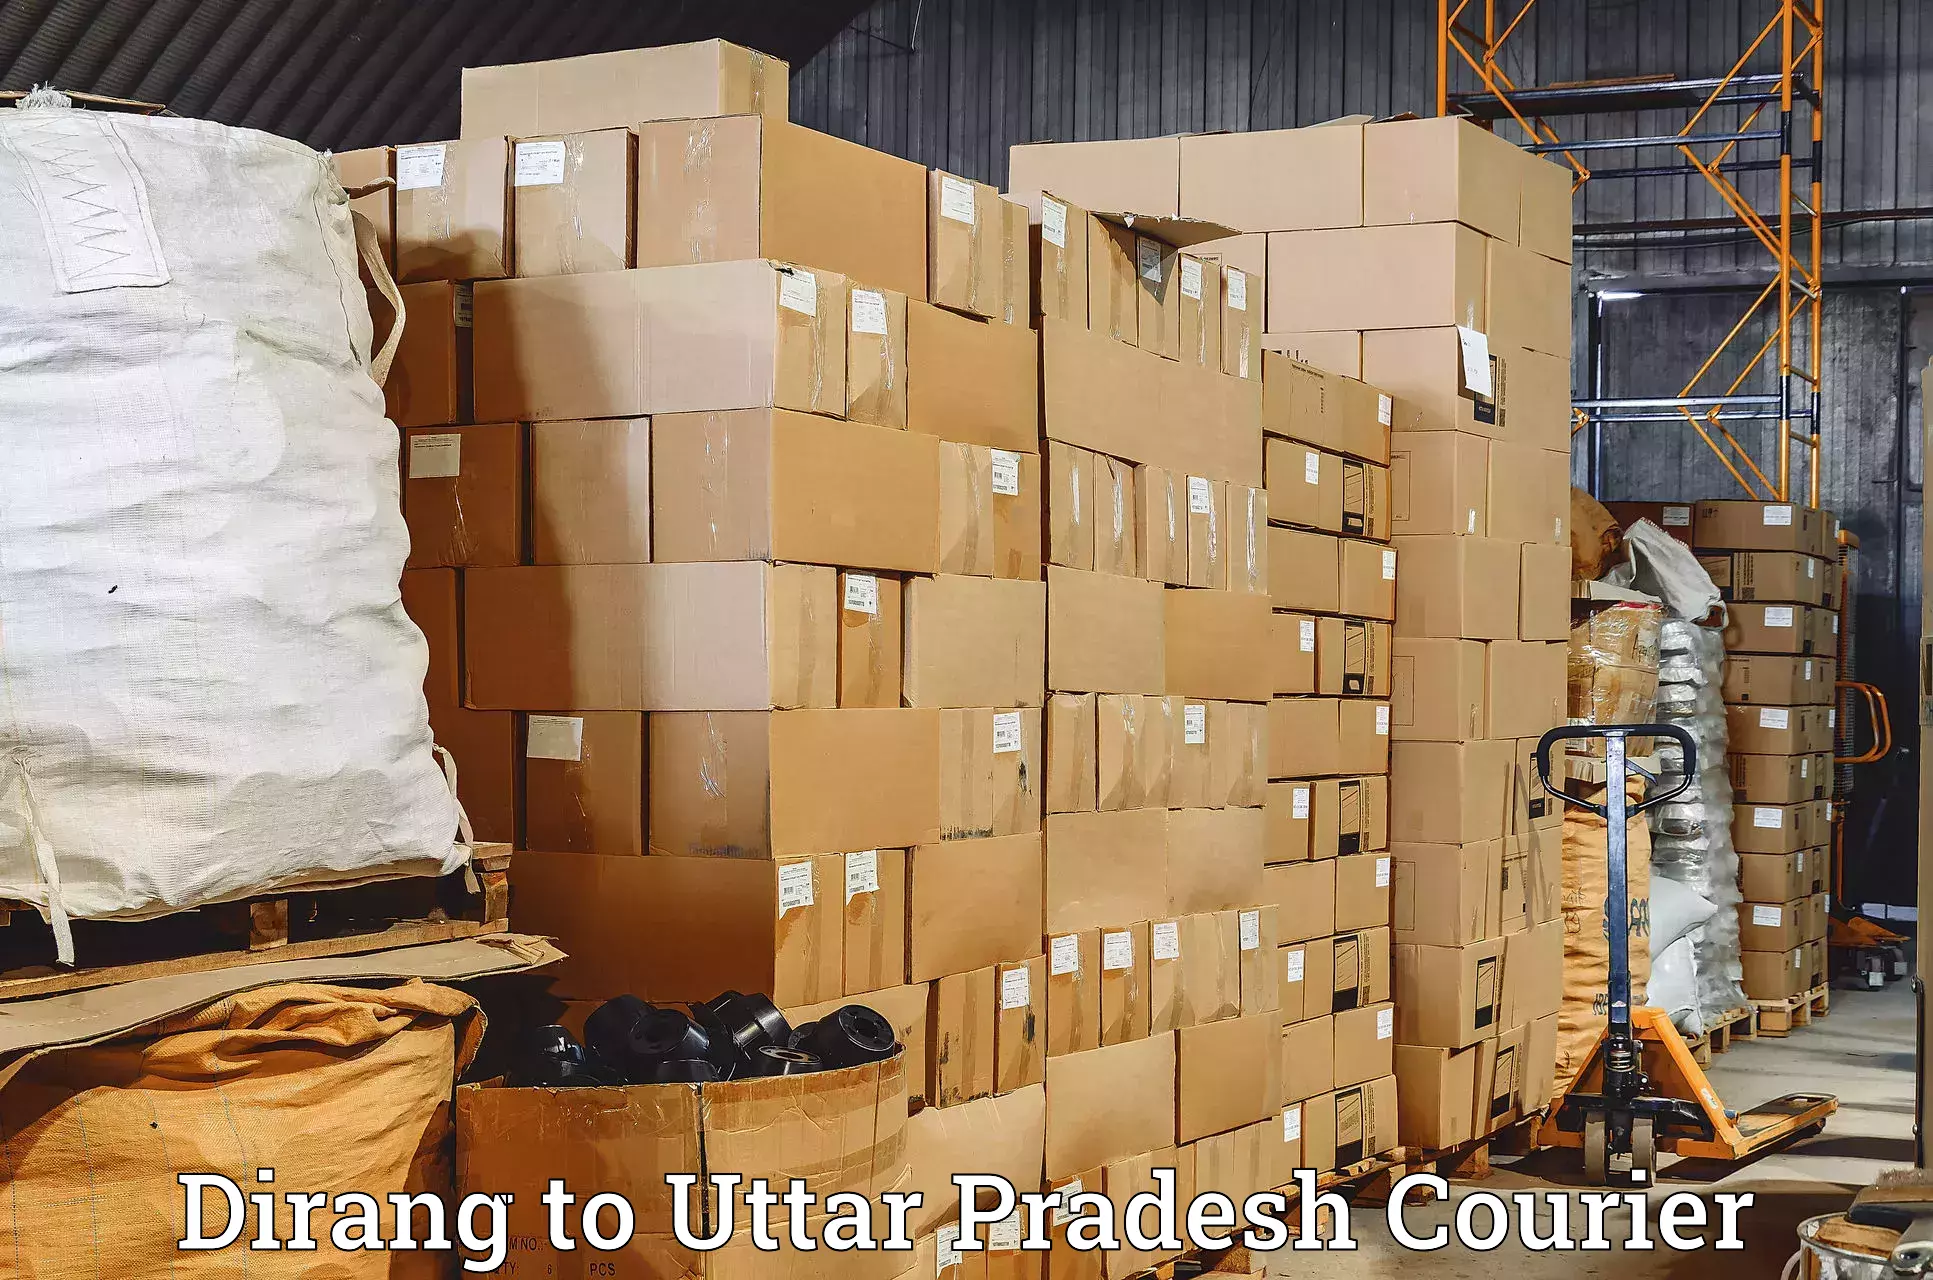 Speedy delivery service Dirang to Chitrakoot